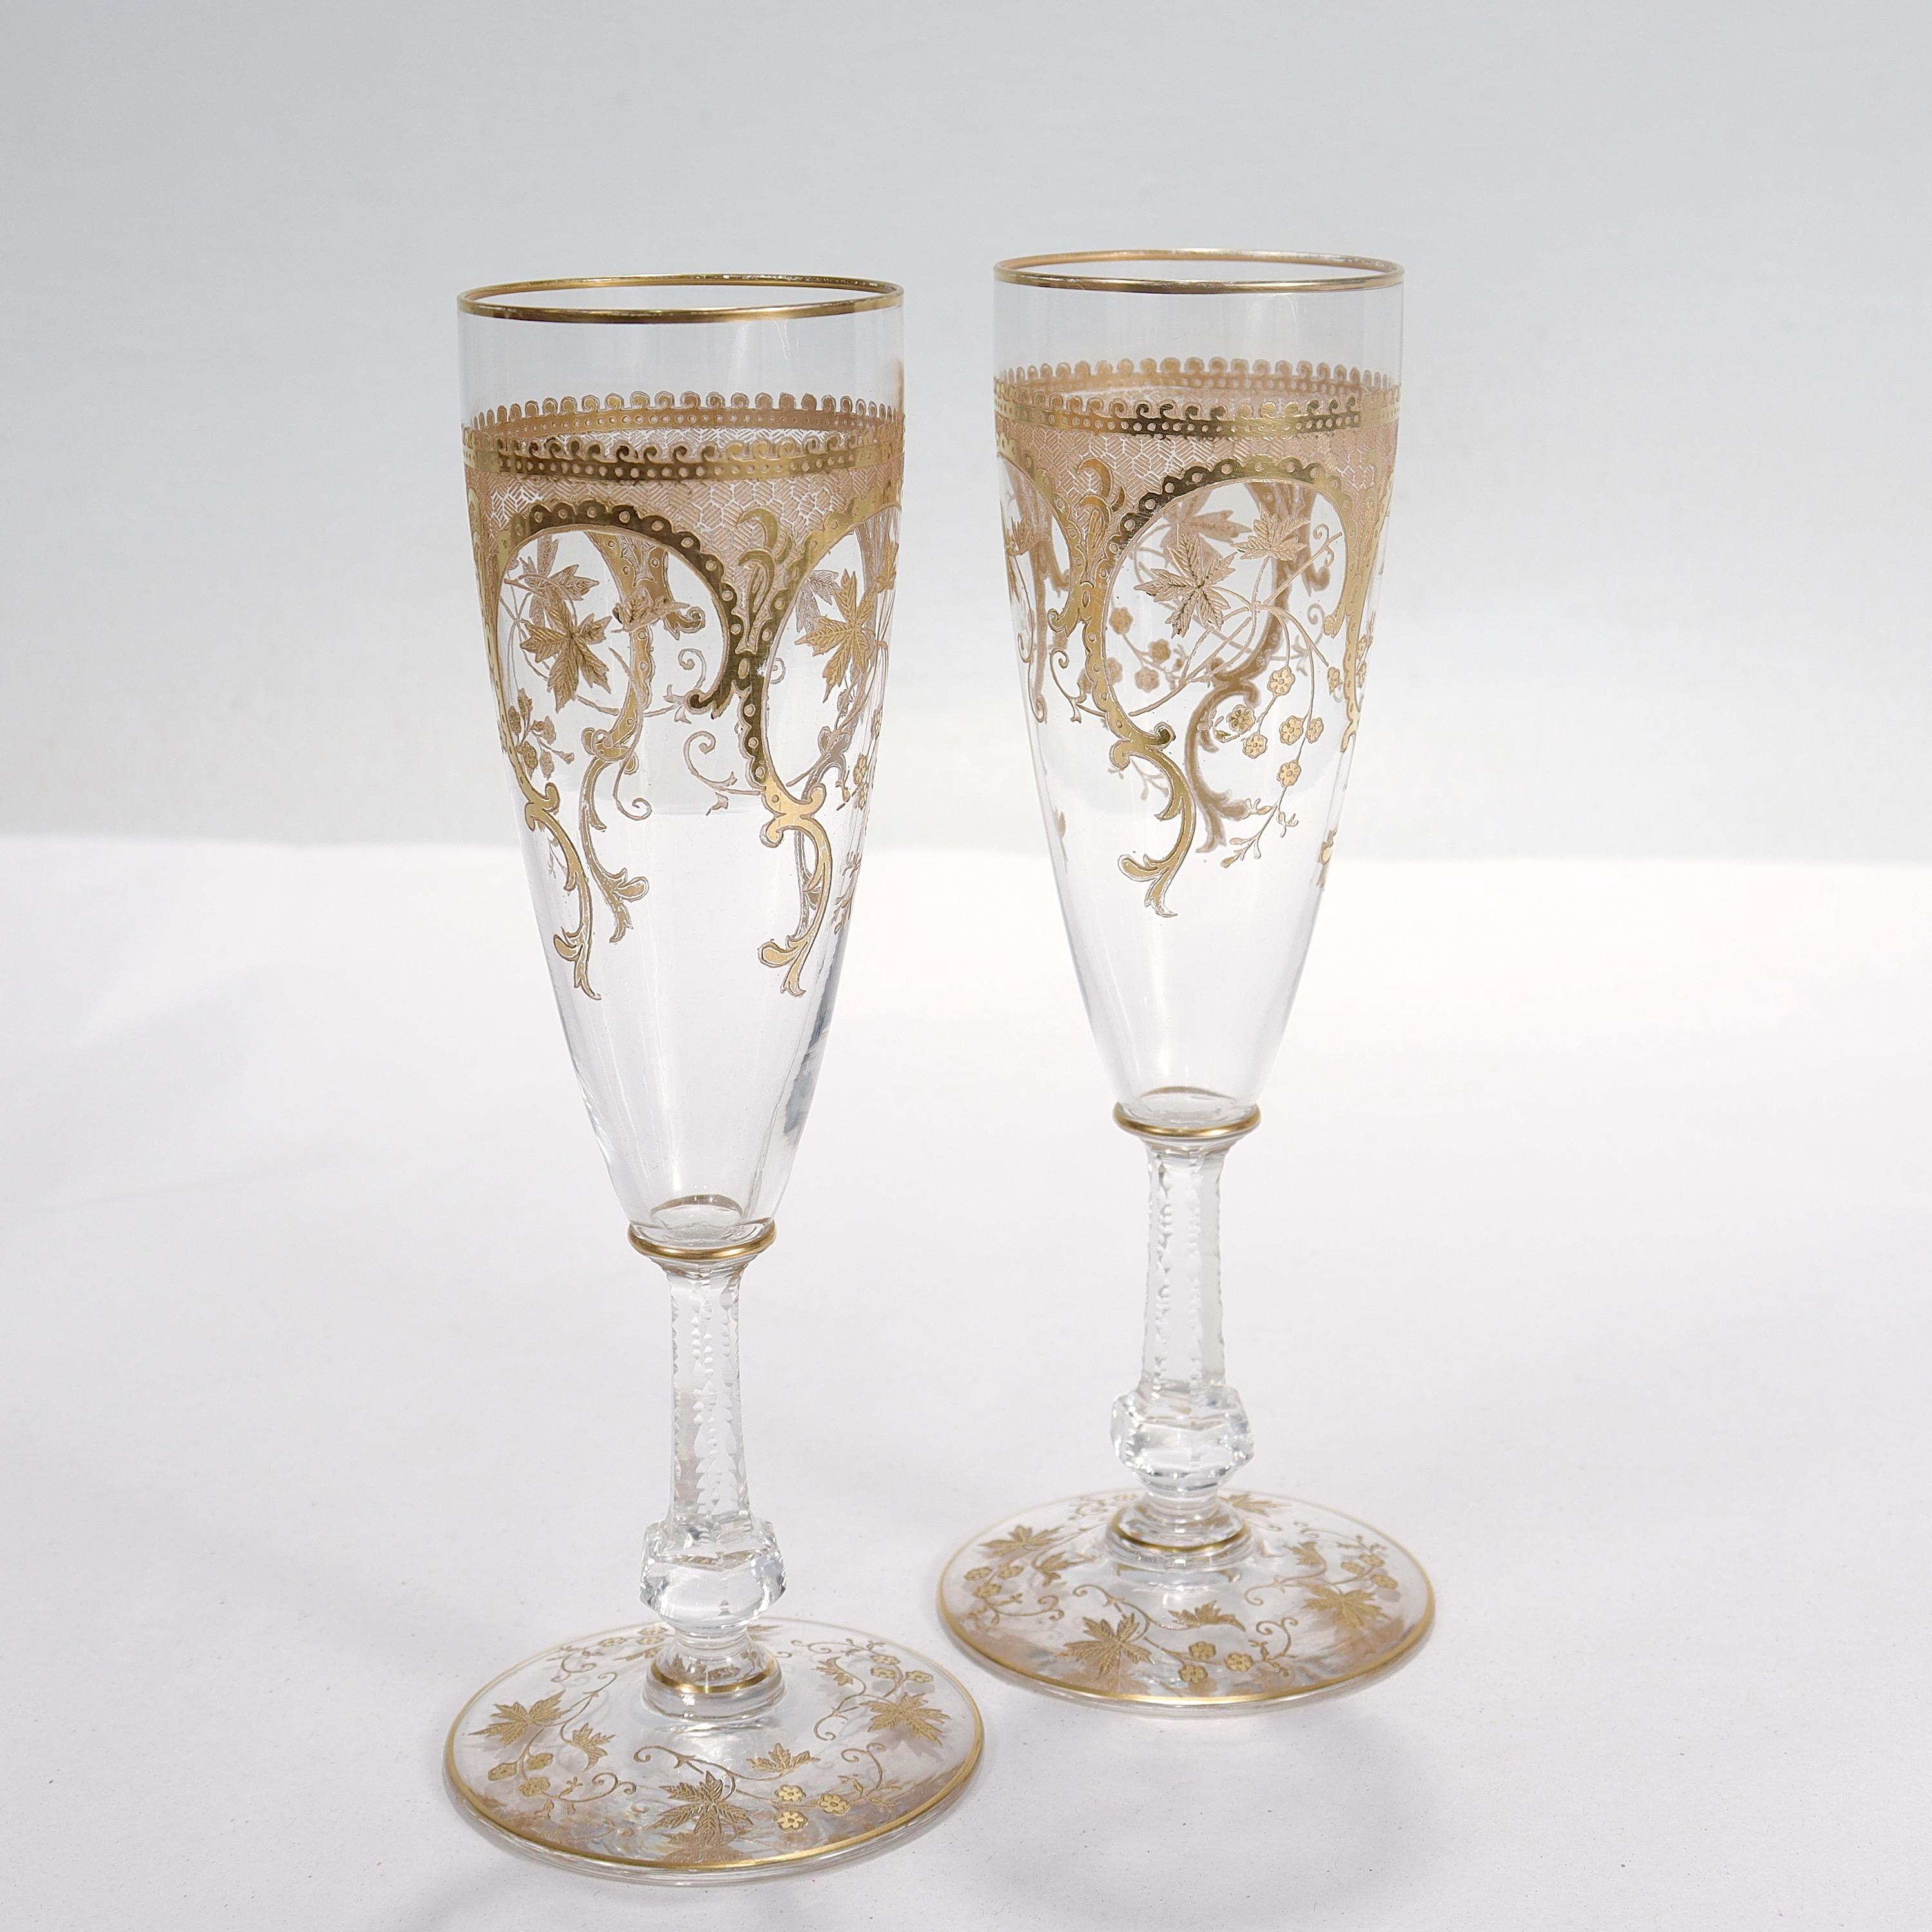 Unknown Pair of Richly Gilt Antique Etched & Cut Glass Champagne Stems / Toasting Flutes